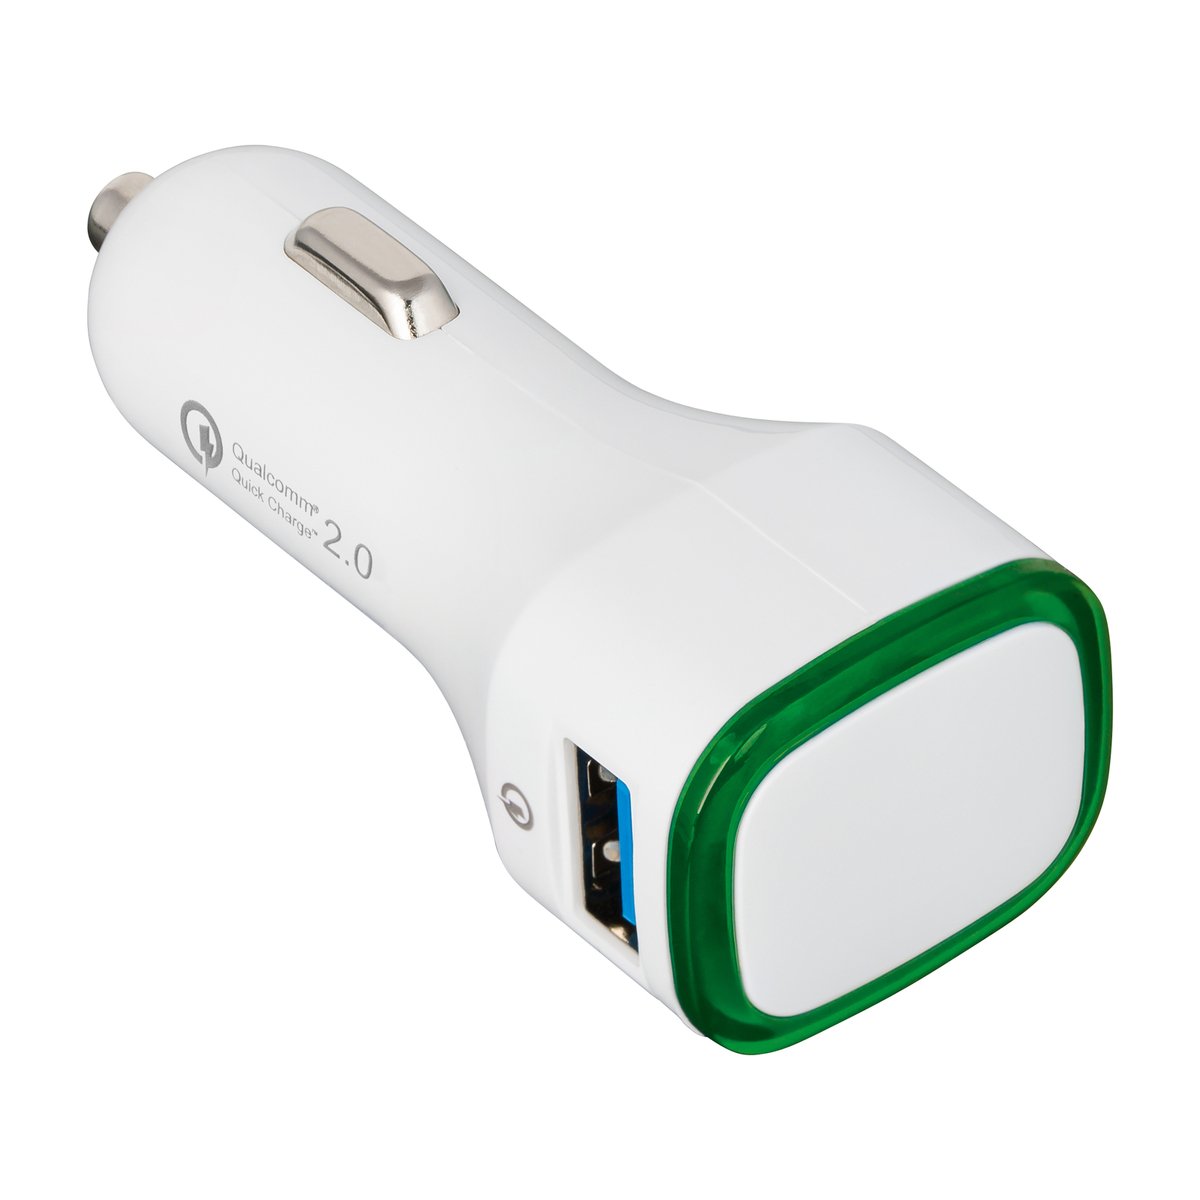 Chargeur voiture USB Quick Charge 2.0® COLLECTION 500 vert